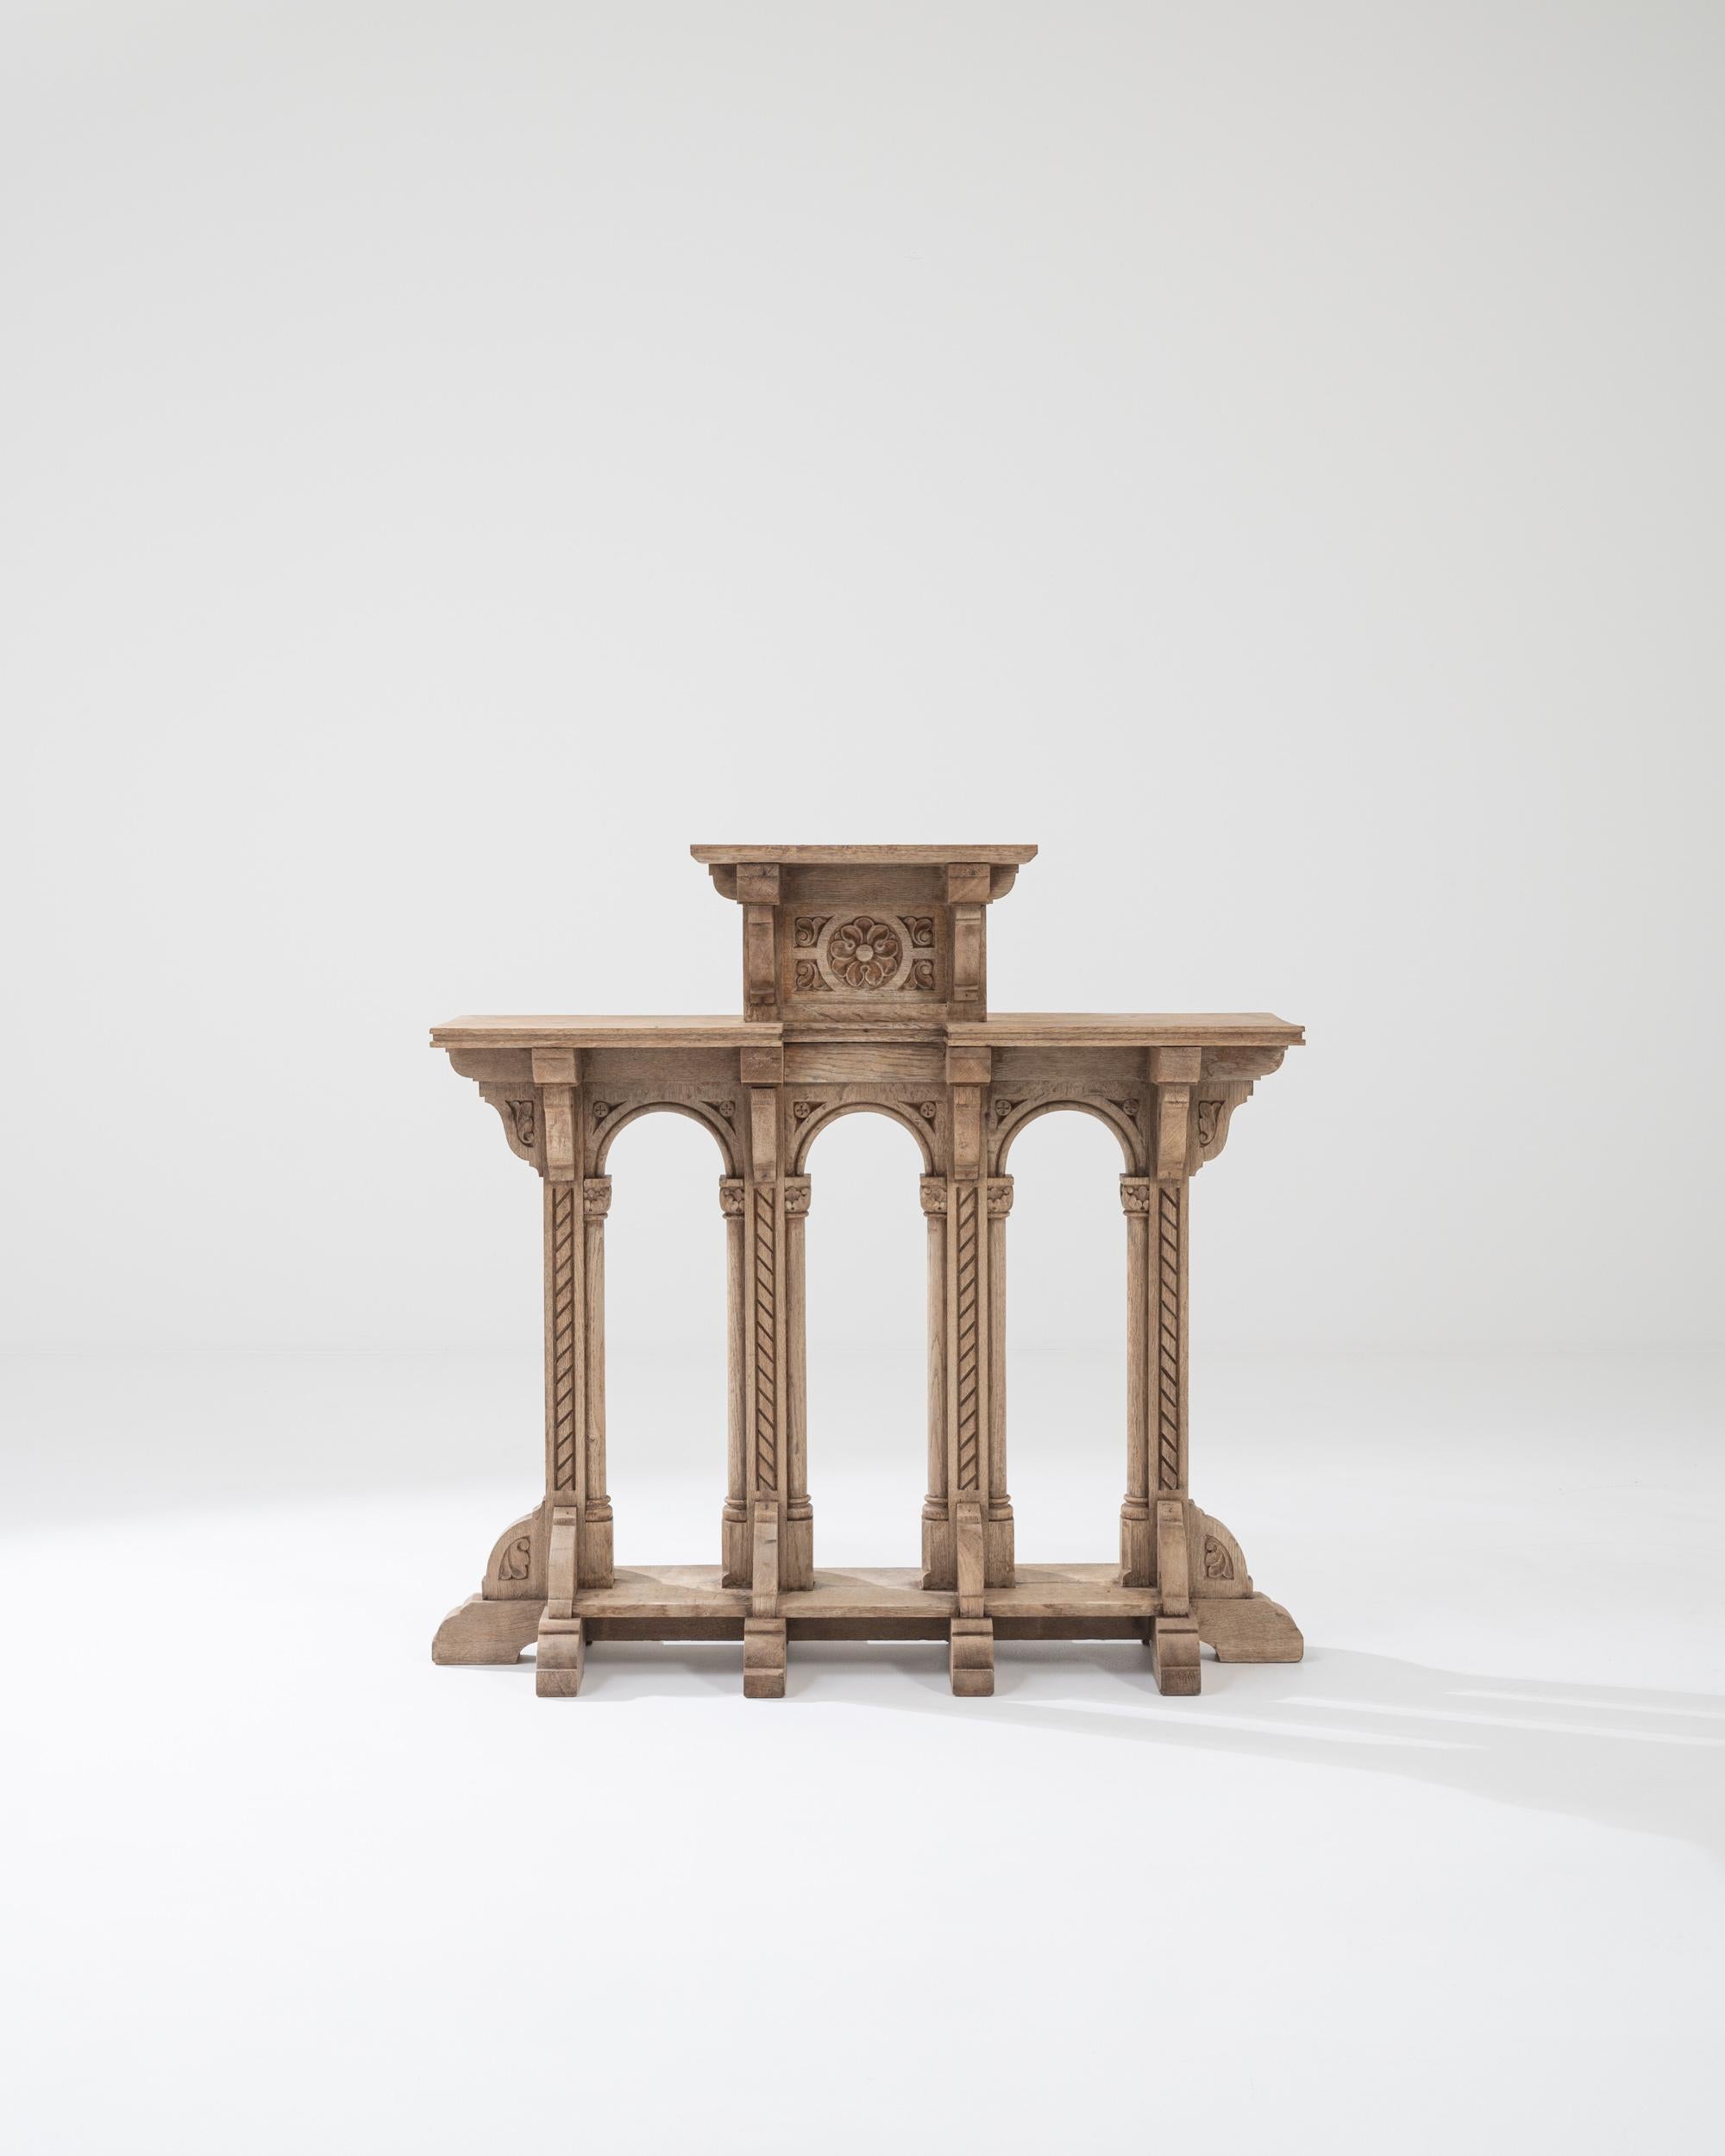 A turn of the century oak pedestal produced in France, this four columns pedestal makes for an ornate statement. Industriously hand carved, this corinthian inspired piece features three top shelves surfaces raised by molded corbel, rope twist